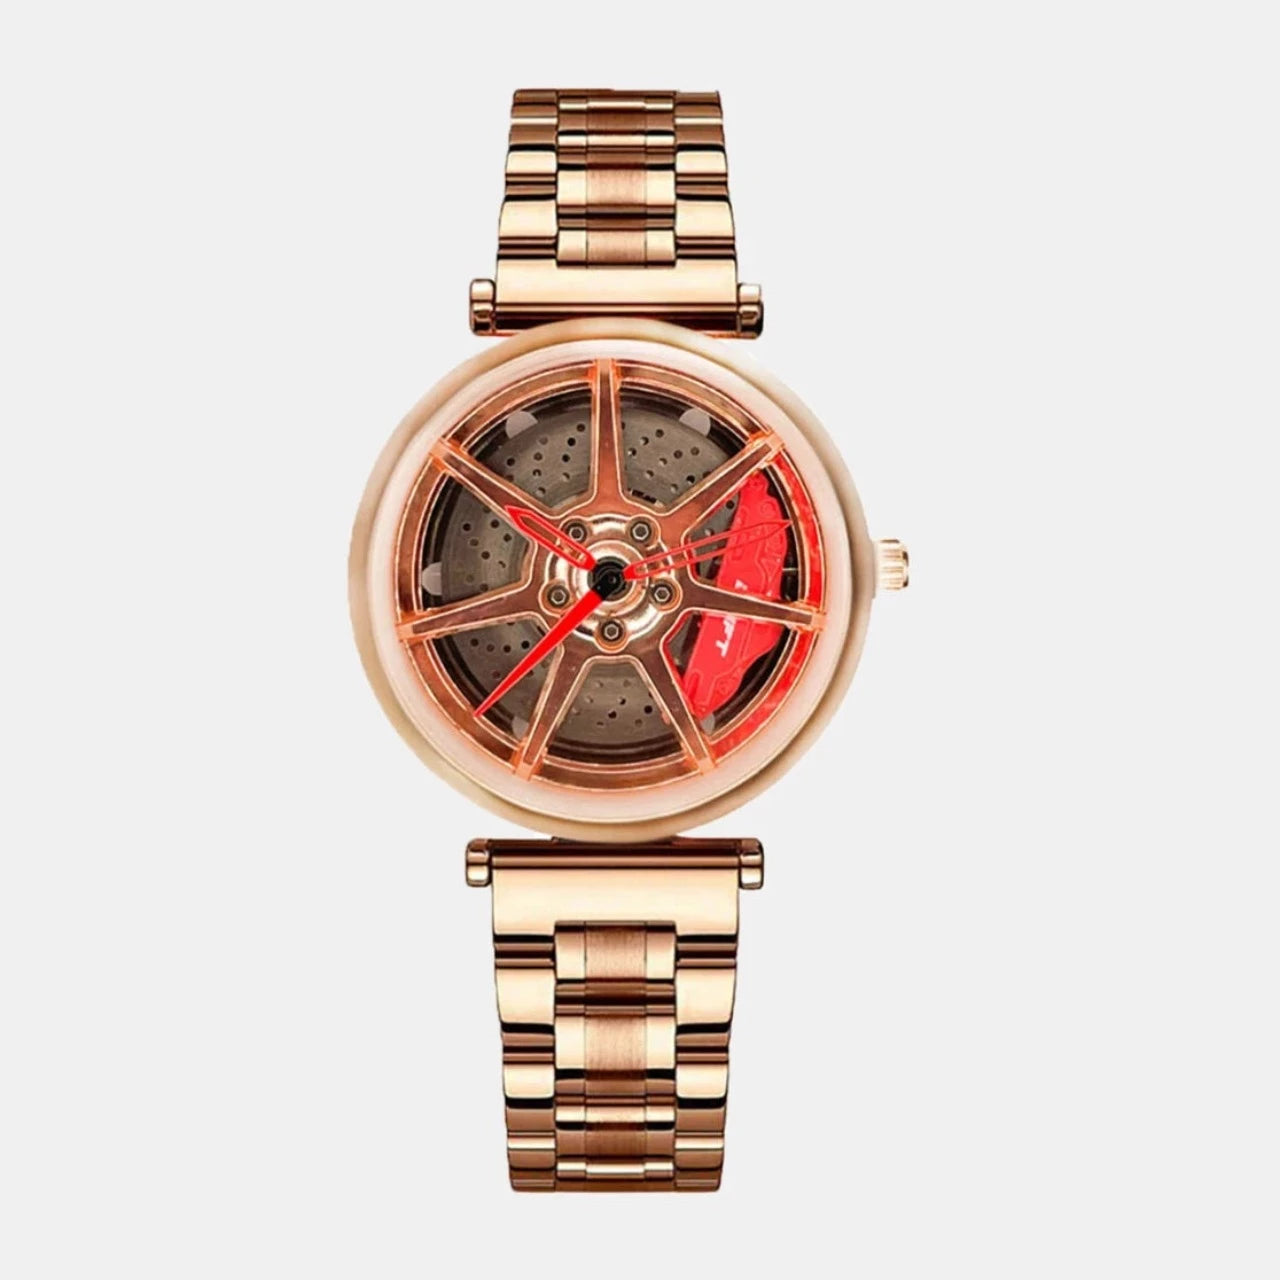 Illuminate your elegance with our rose women's Rim Watch! Crafted by a German startup, these precision watches feature innovative design. Designed to captivate motorsport, tuning, and auto enthusiasts. #id_46744378966346